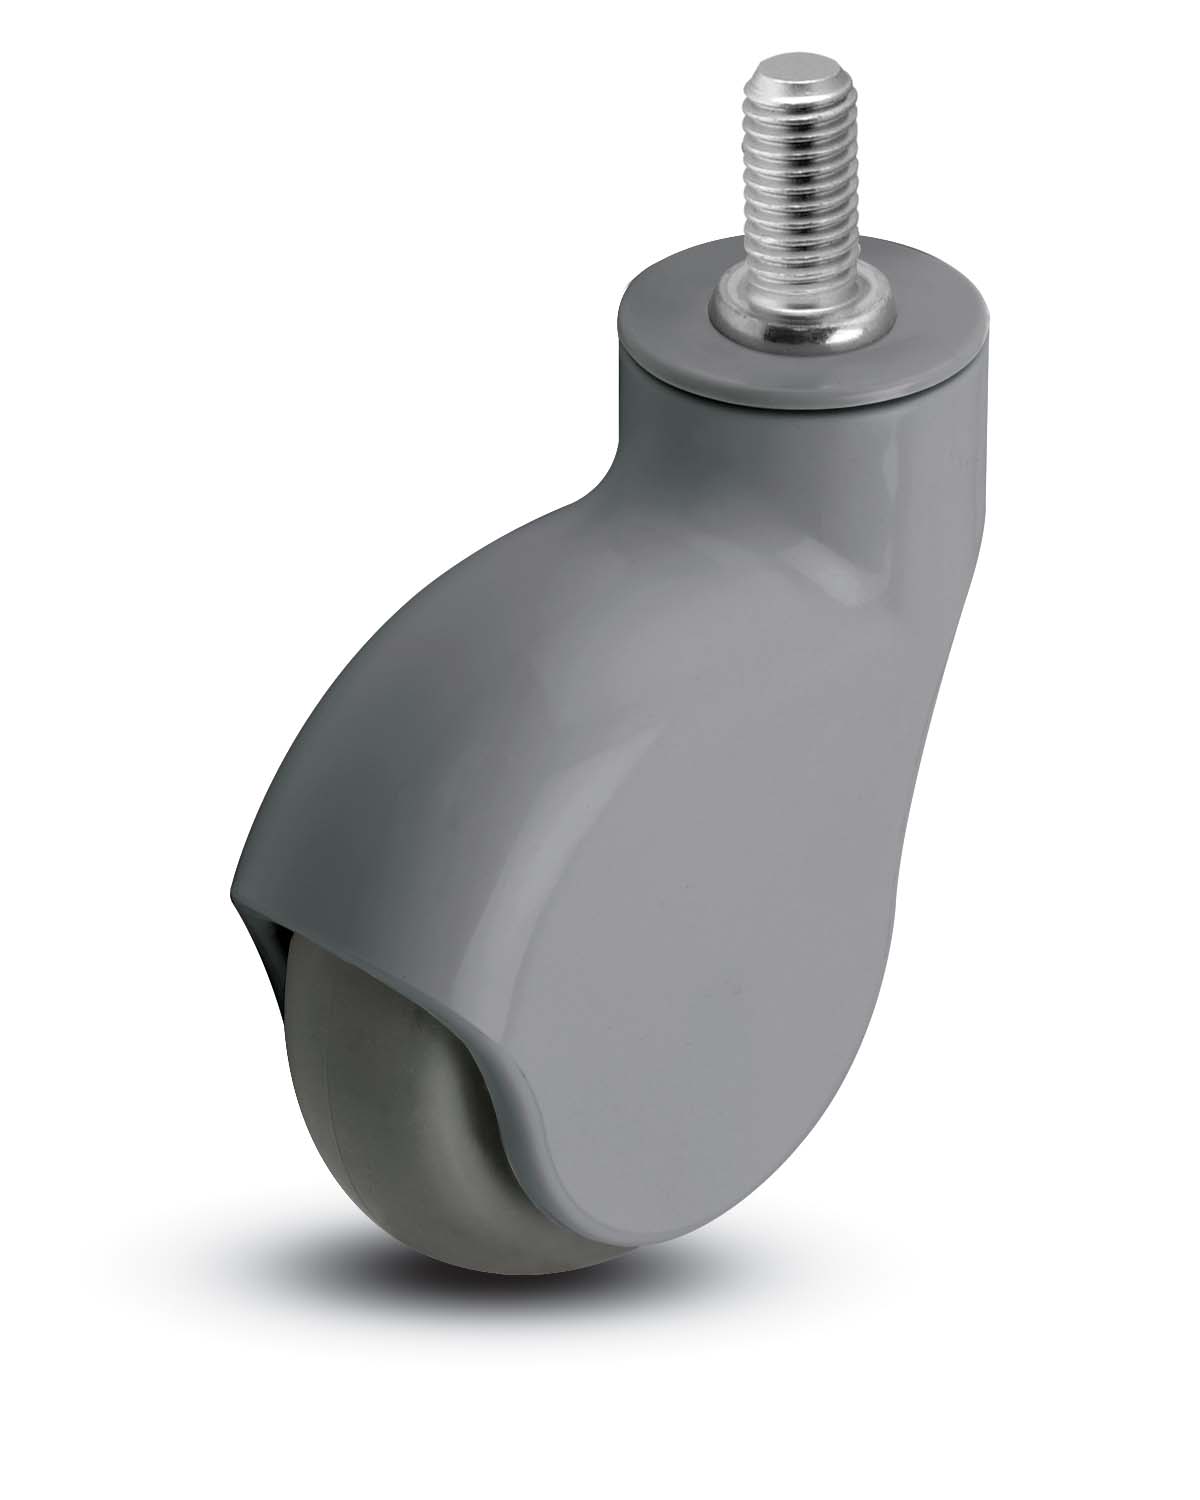 Caster; Swivel; 4 x 1-1/4; Thermoplastized Rubber (Gray); Threaded Stem (1/2-13TPI x 1-1/2); Gray Rig; Precision Ball Brng; 225#; Raceway Seal; Thread guards (Item #65144)